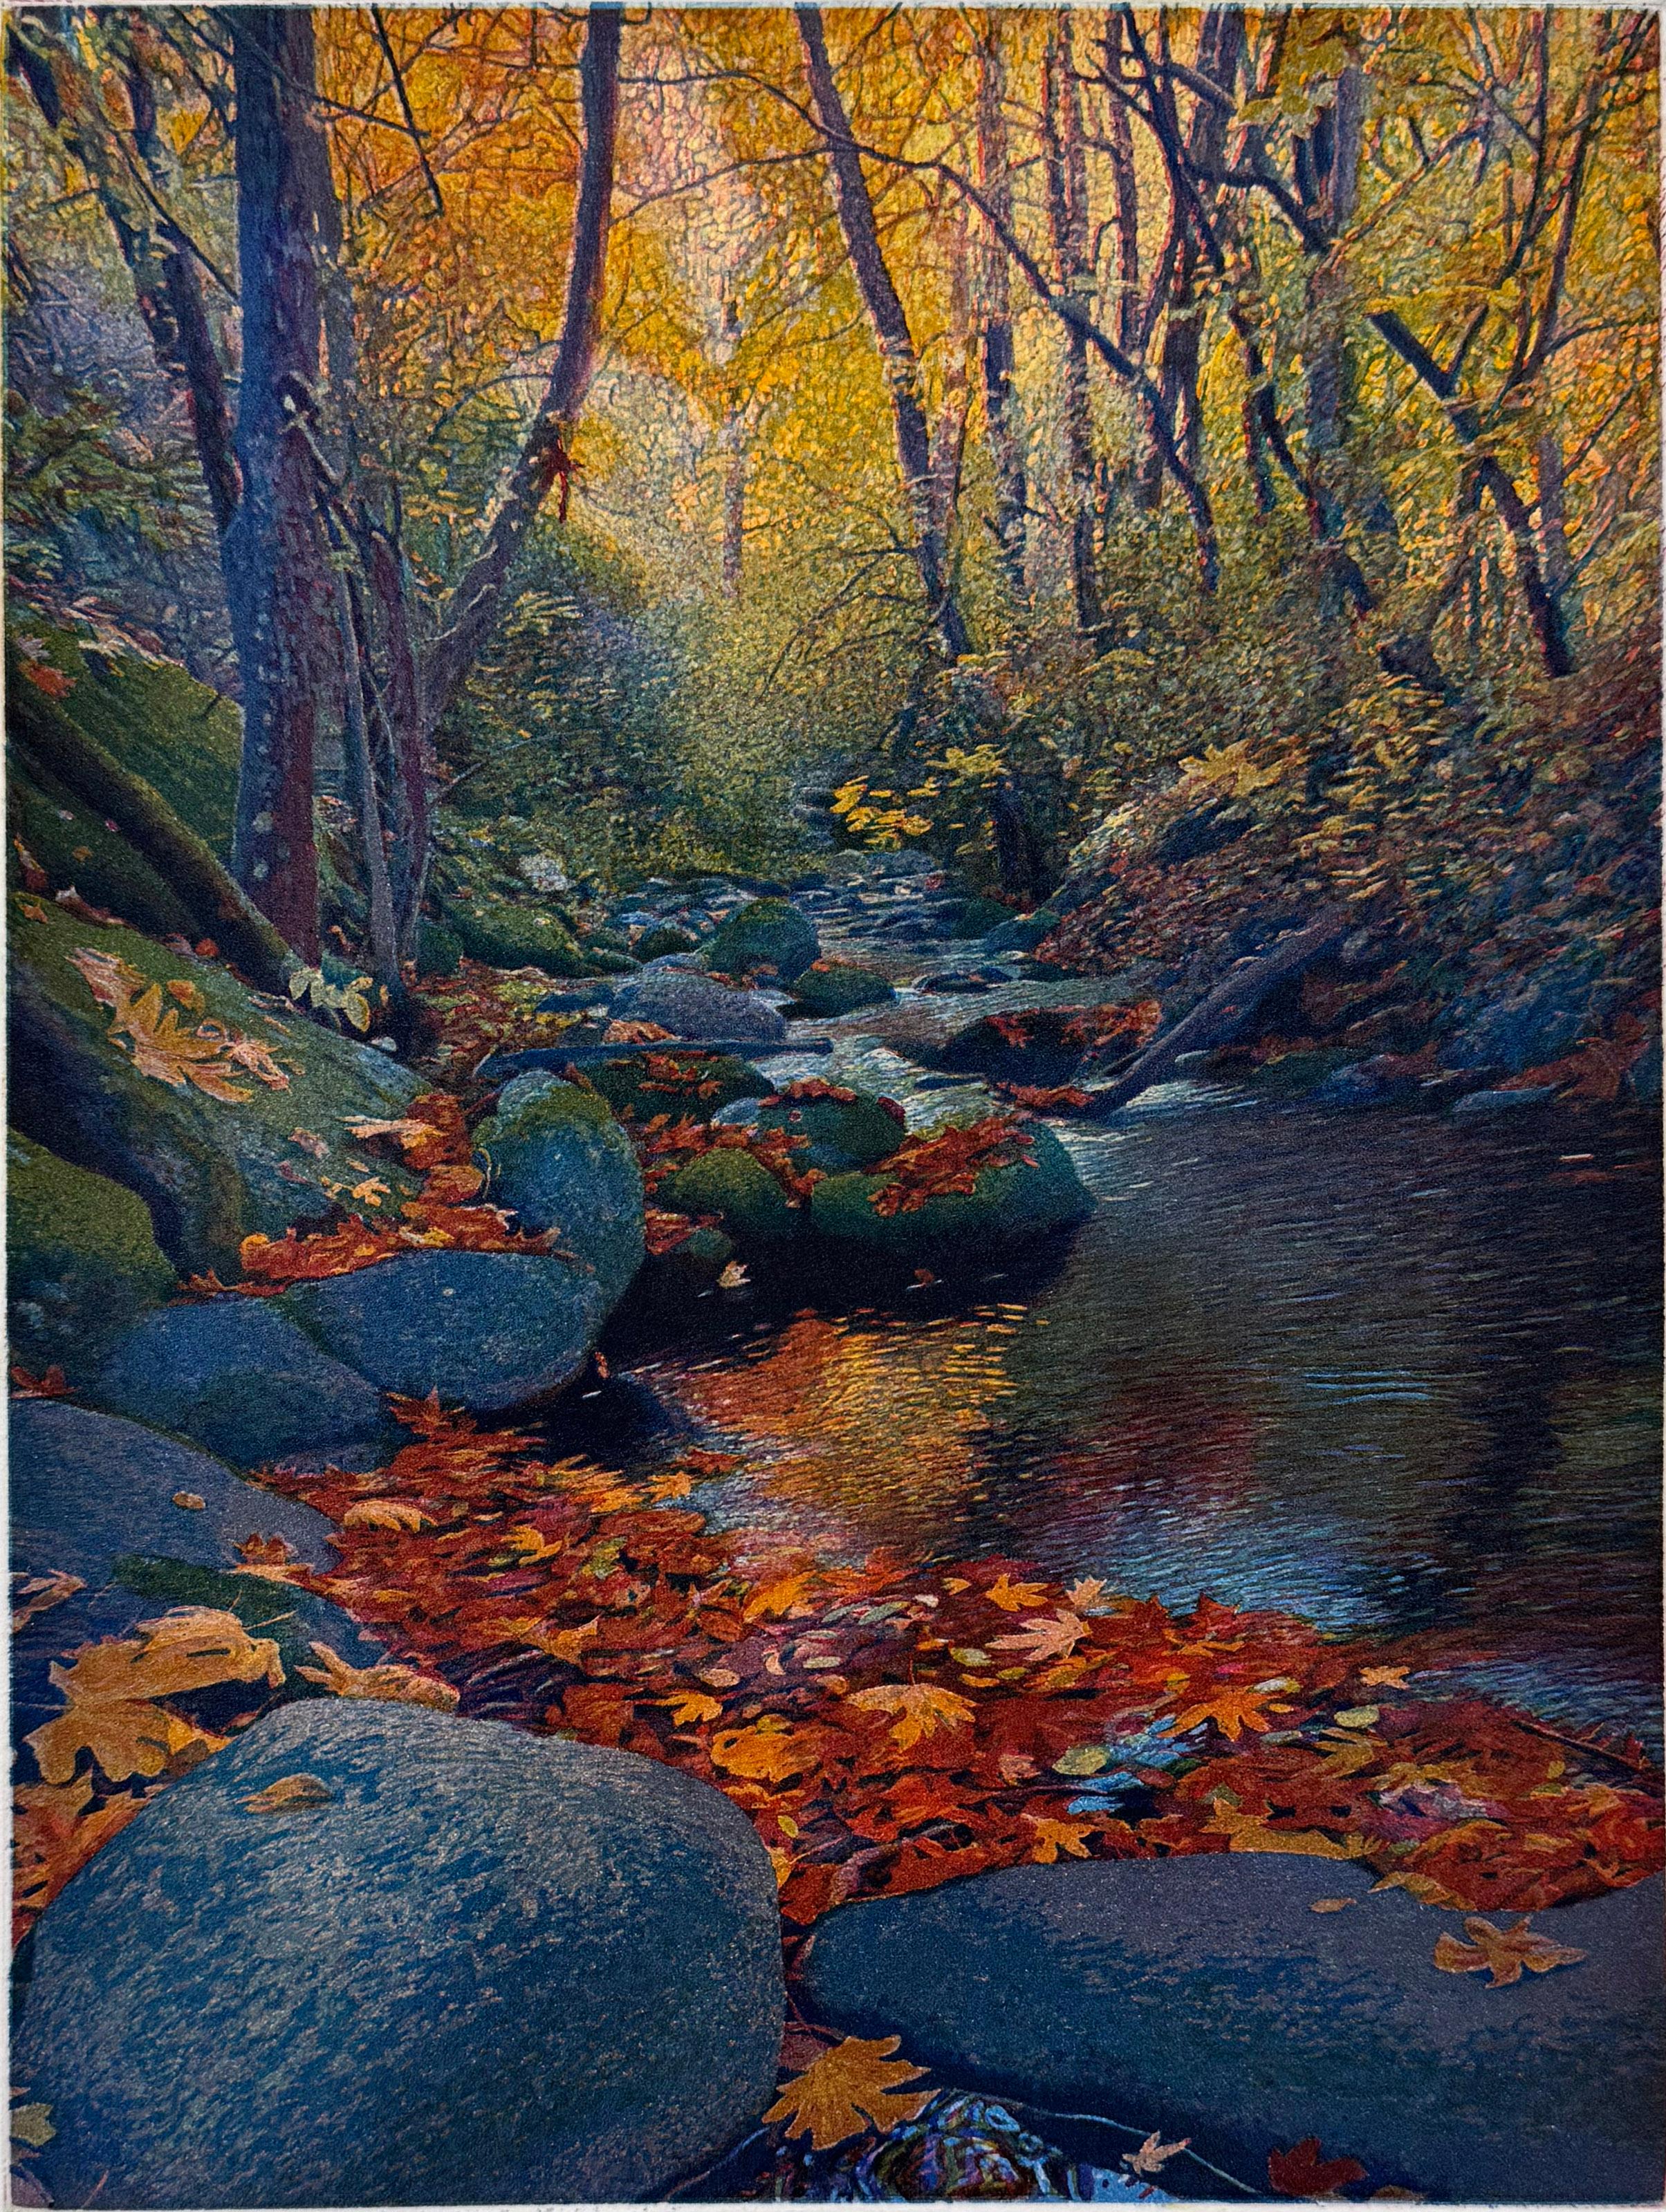 Signed, titled and numbered by the artist. 
Medium: etching and aquatint
Image size:  12 x 9 inches
Year: 2019

Fall colors in Lithia Park, Ashland OR

Born in Berkeley, California, on December 21, 1949, he was raised in a home that had a sweeping